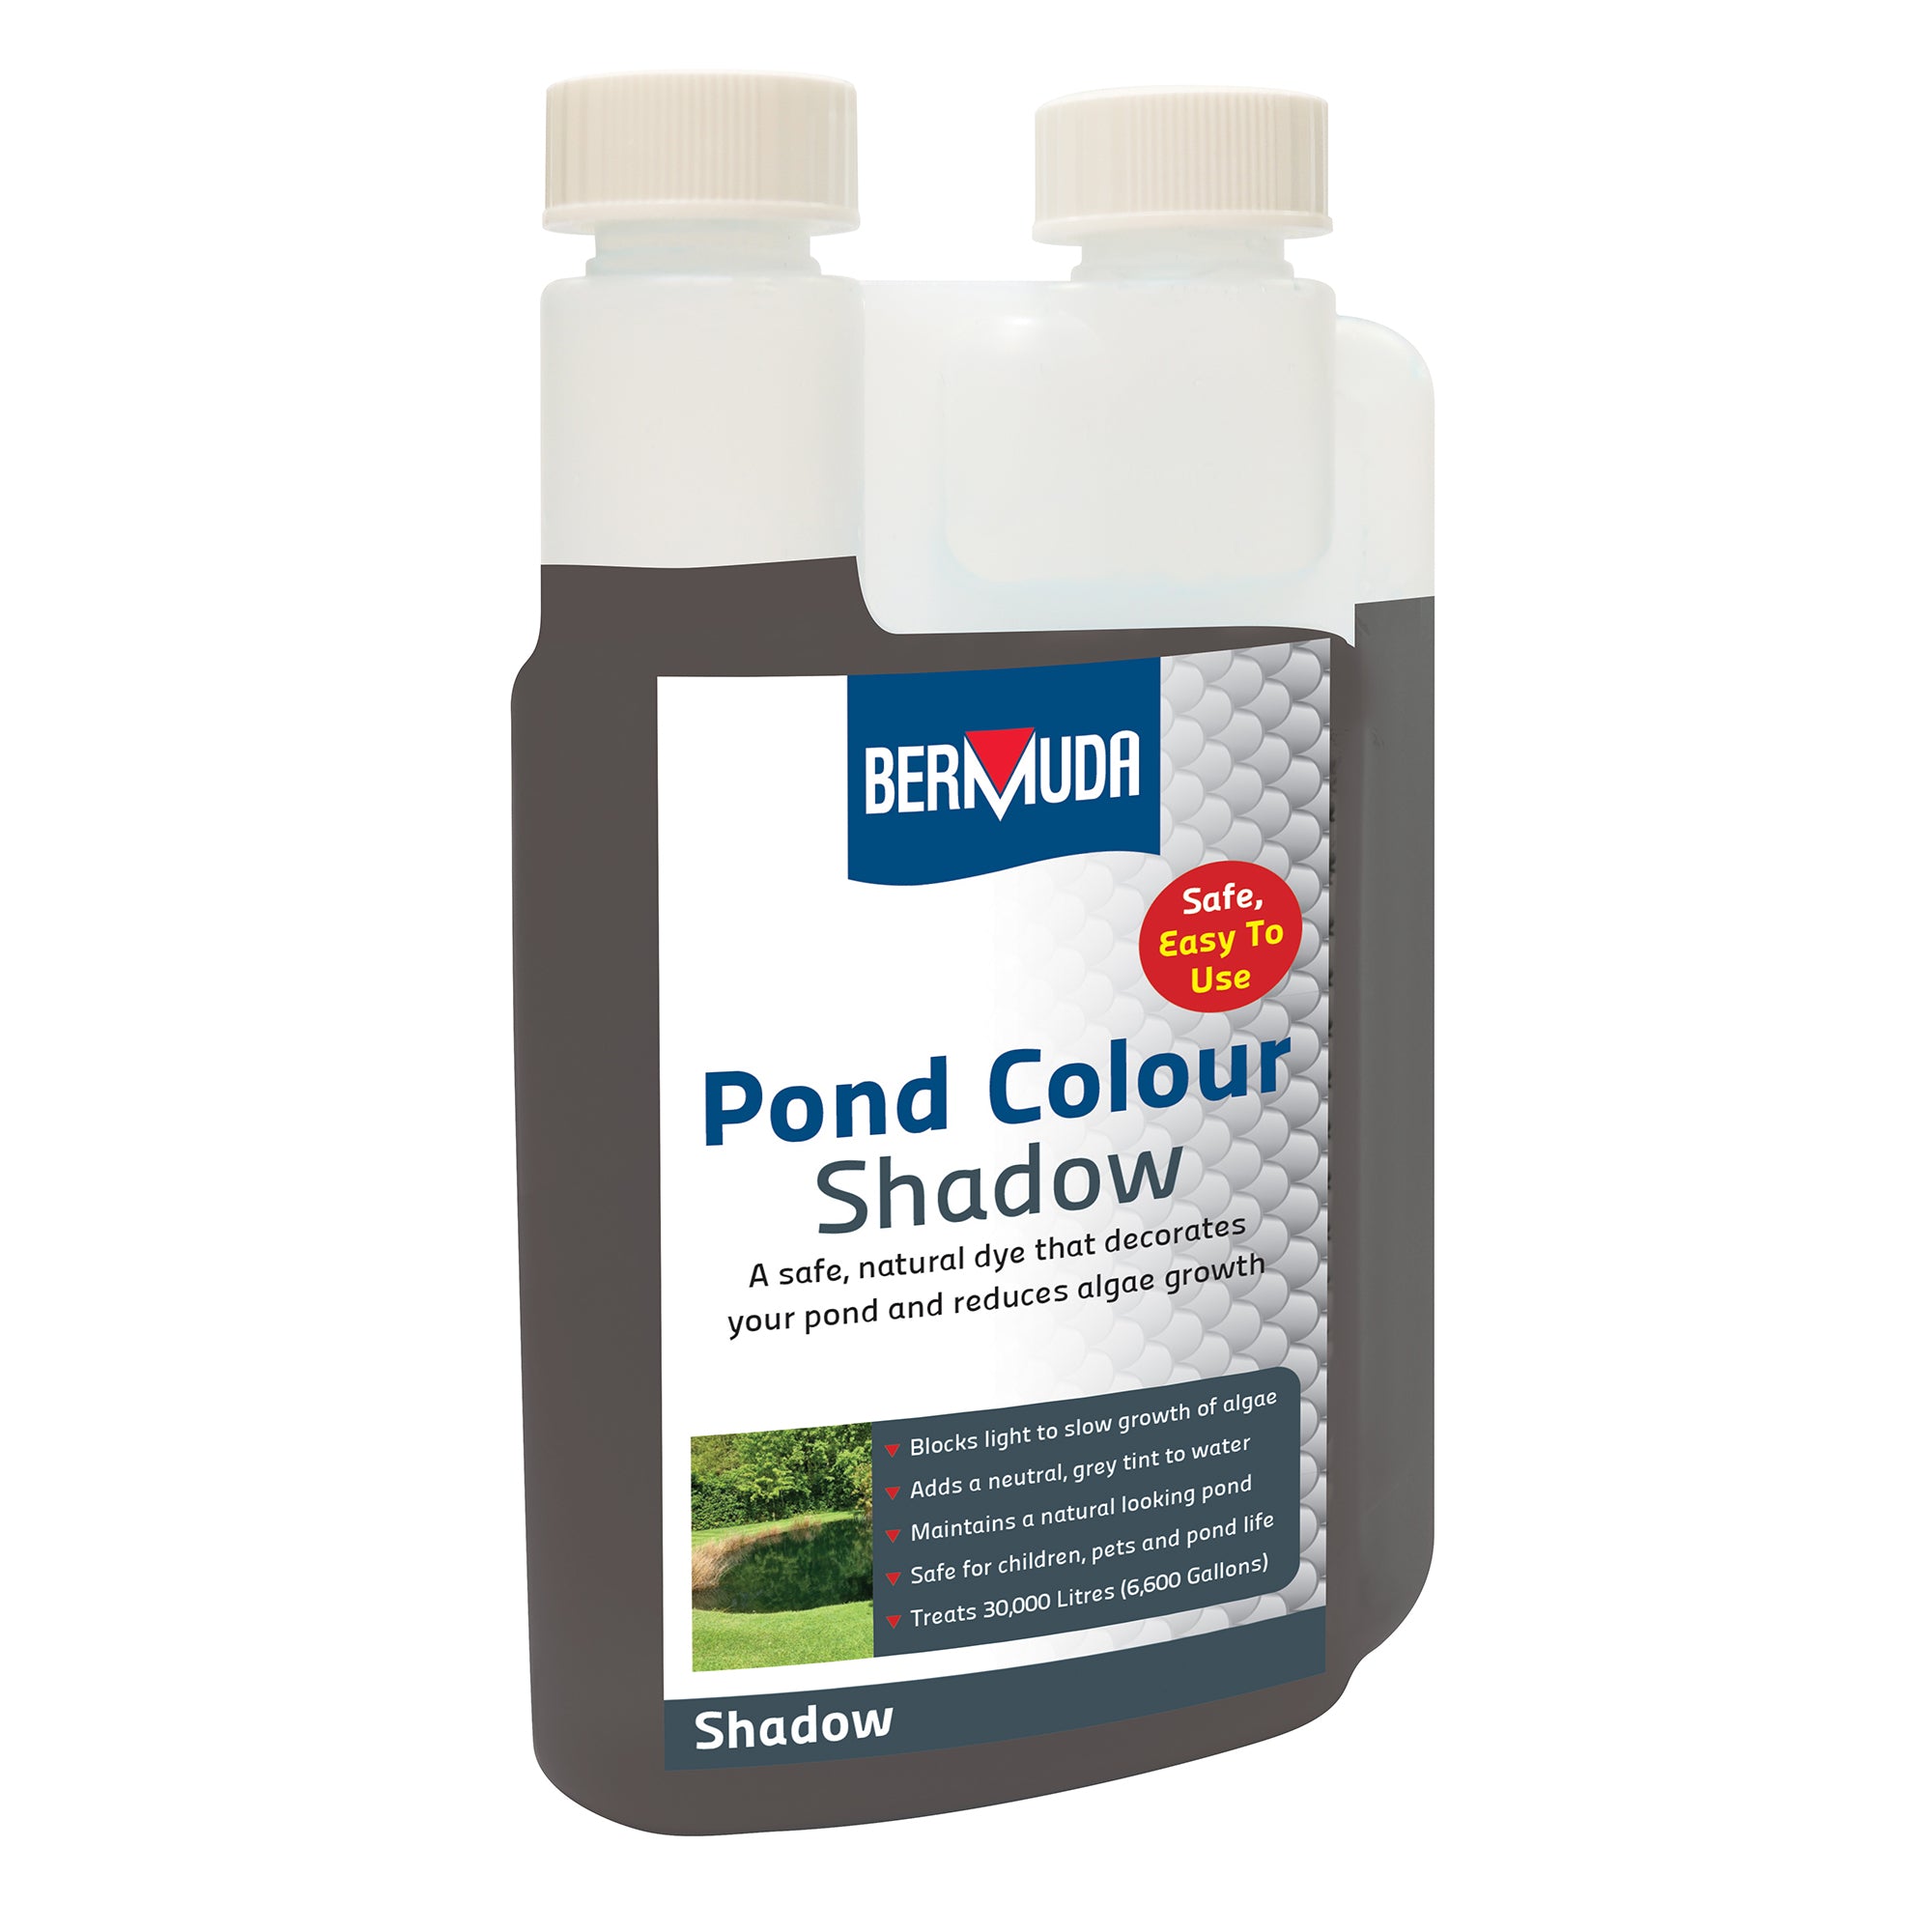 Bermuda Pond Colour Water Dyes Shadow 2 Sizes